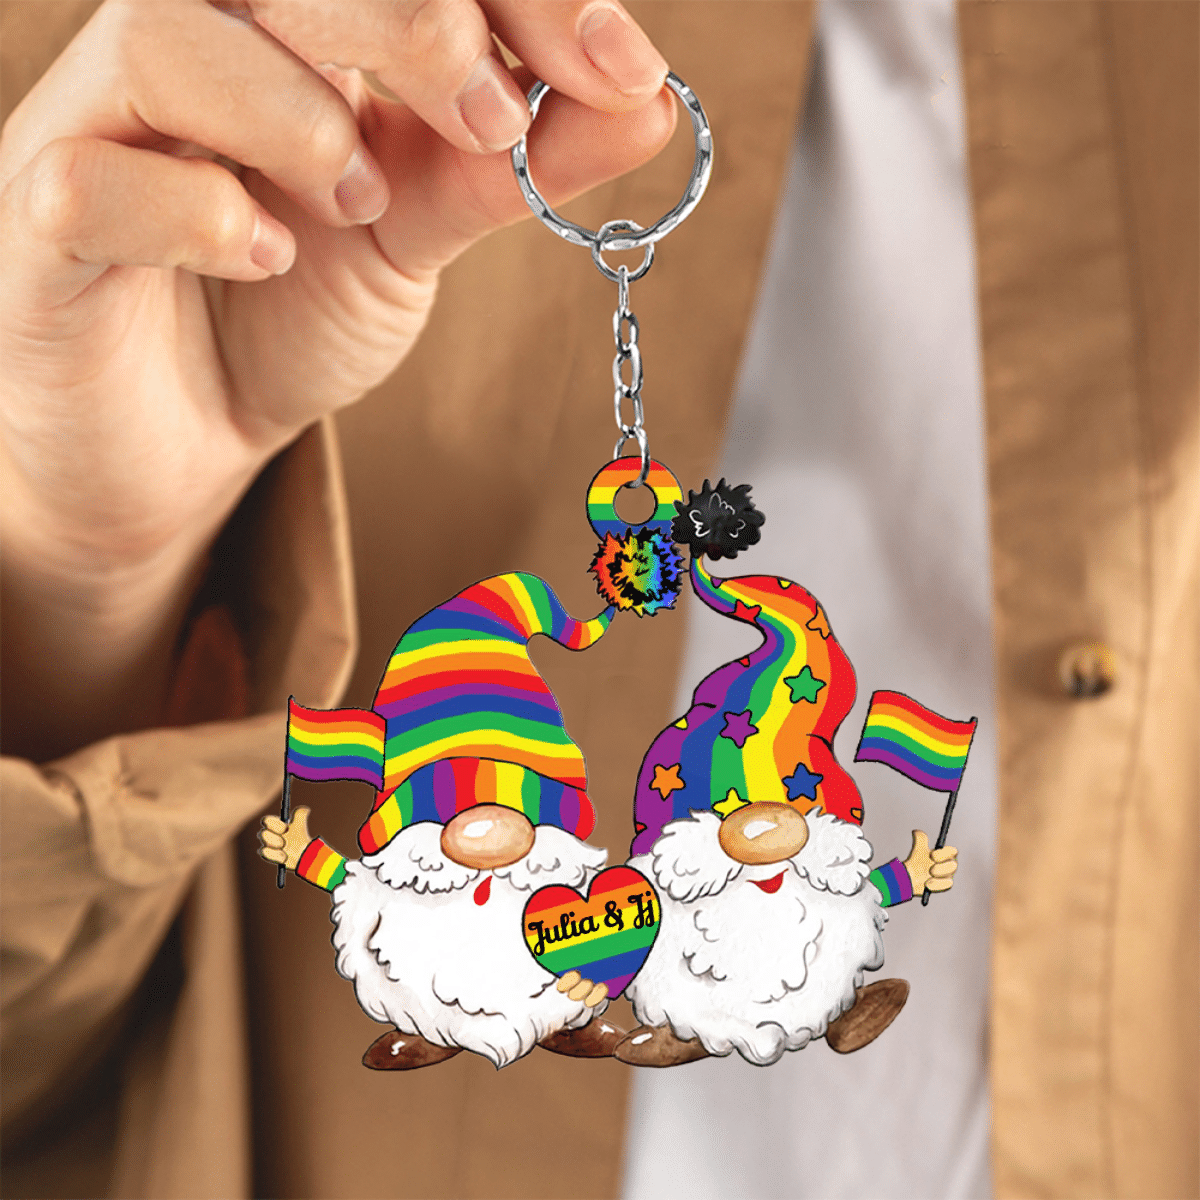 Personalized LGBT Keychain/ Custom Couple Name Acrylic LGBT Keychain for Pride Month/ Keychain for Husband and Wife